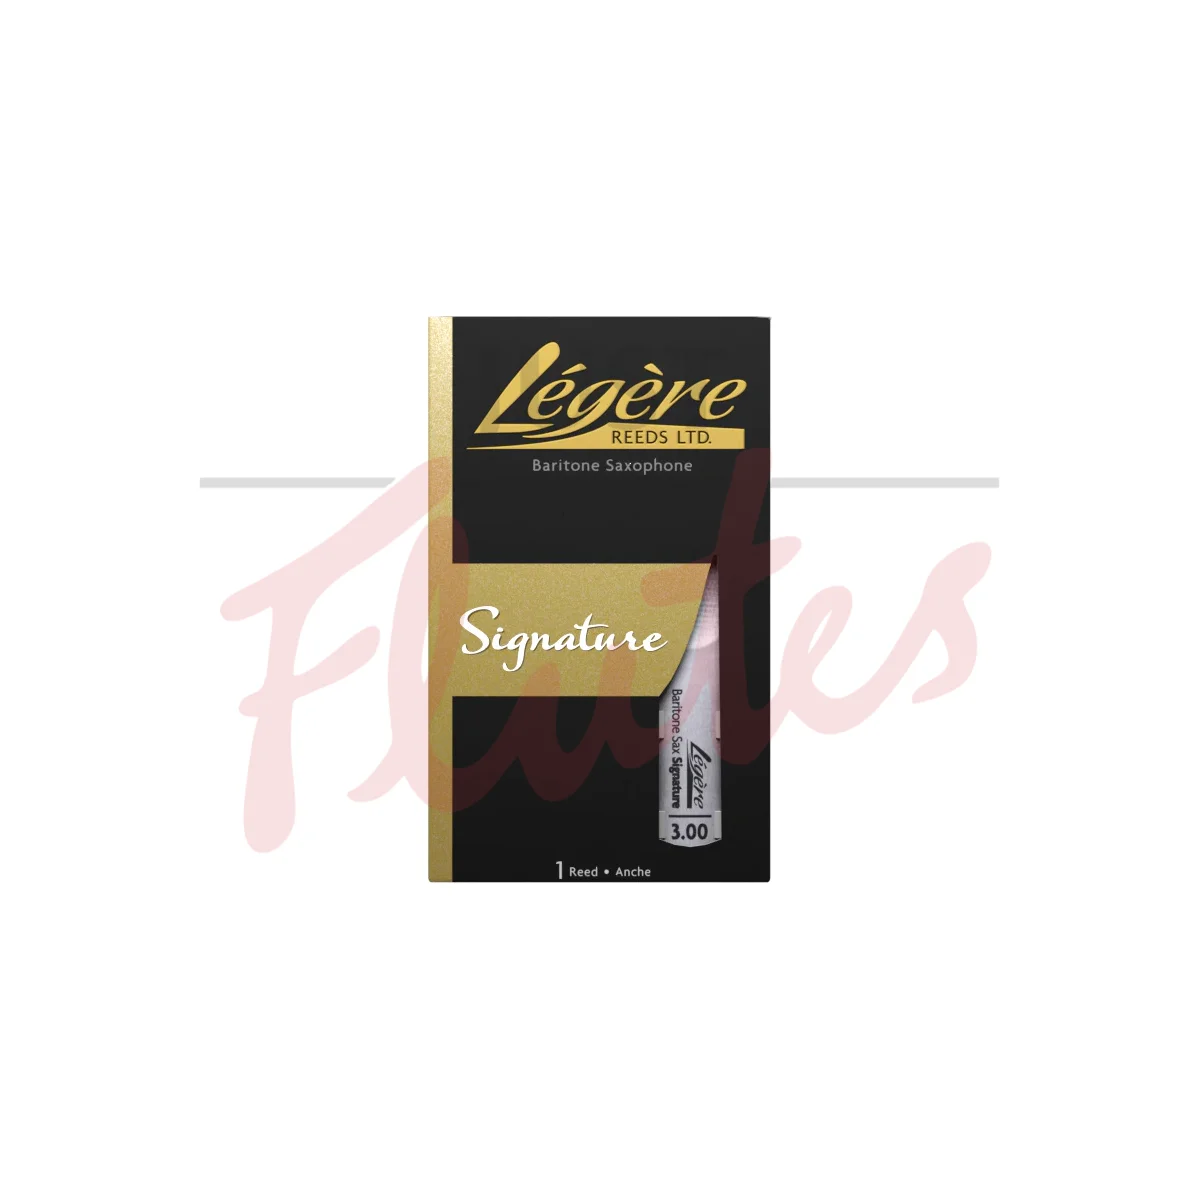 Légère Signature Synthetic Baritone Saxophone Reed Strength 3.25